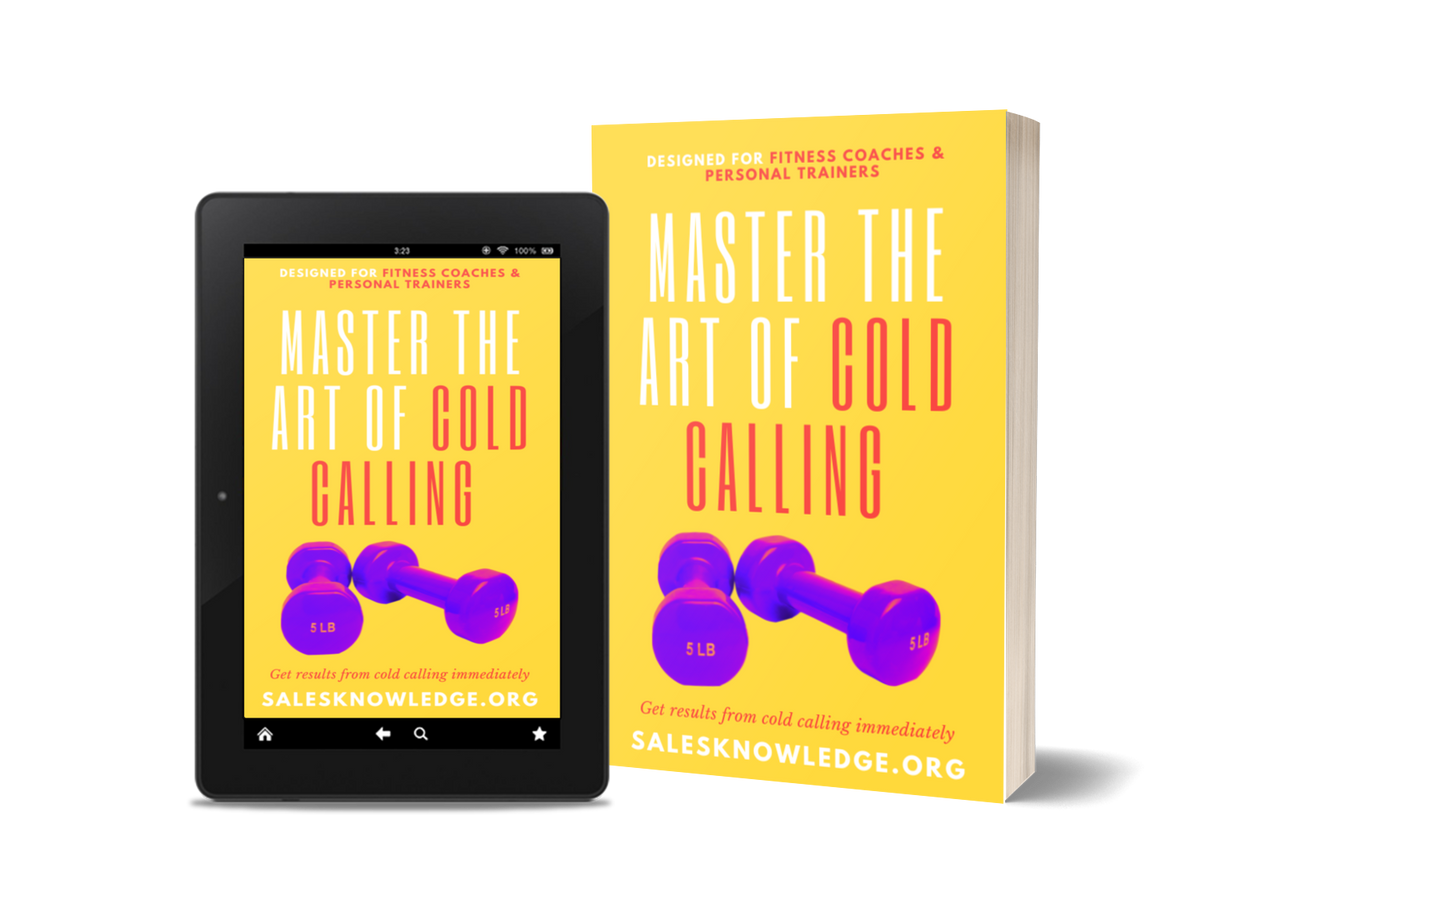 Master the Art of Cold Calling - Fitness and Health Industry